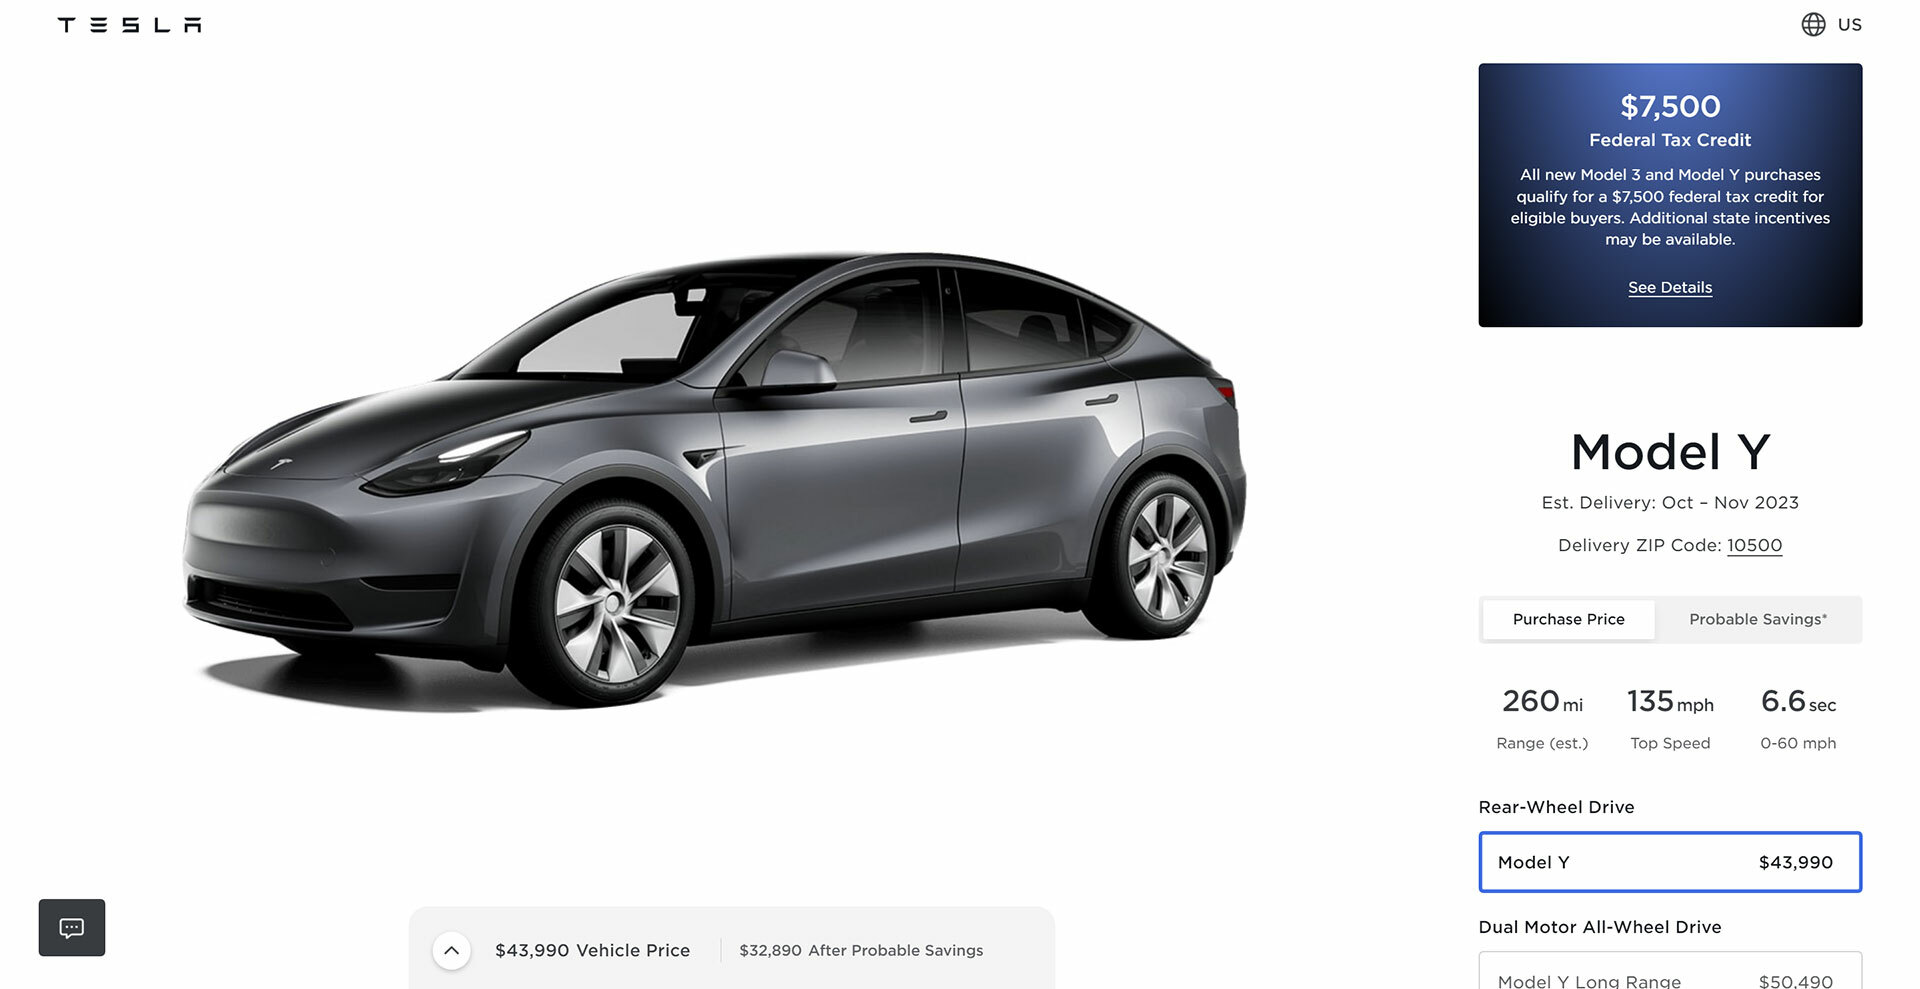 Tesla Model Y has the best resale value out of all BEVs in China